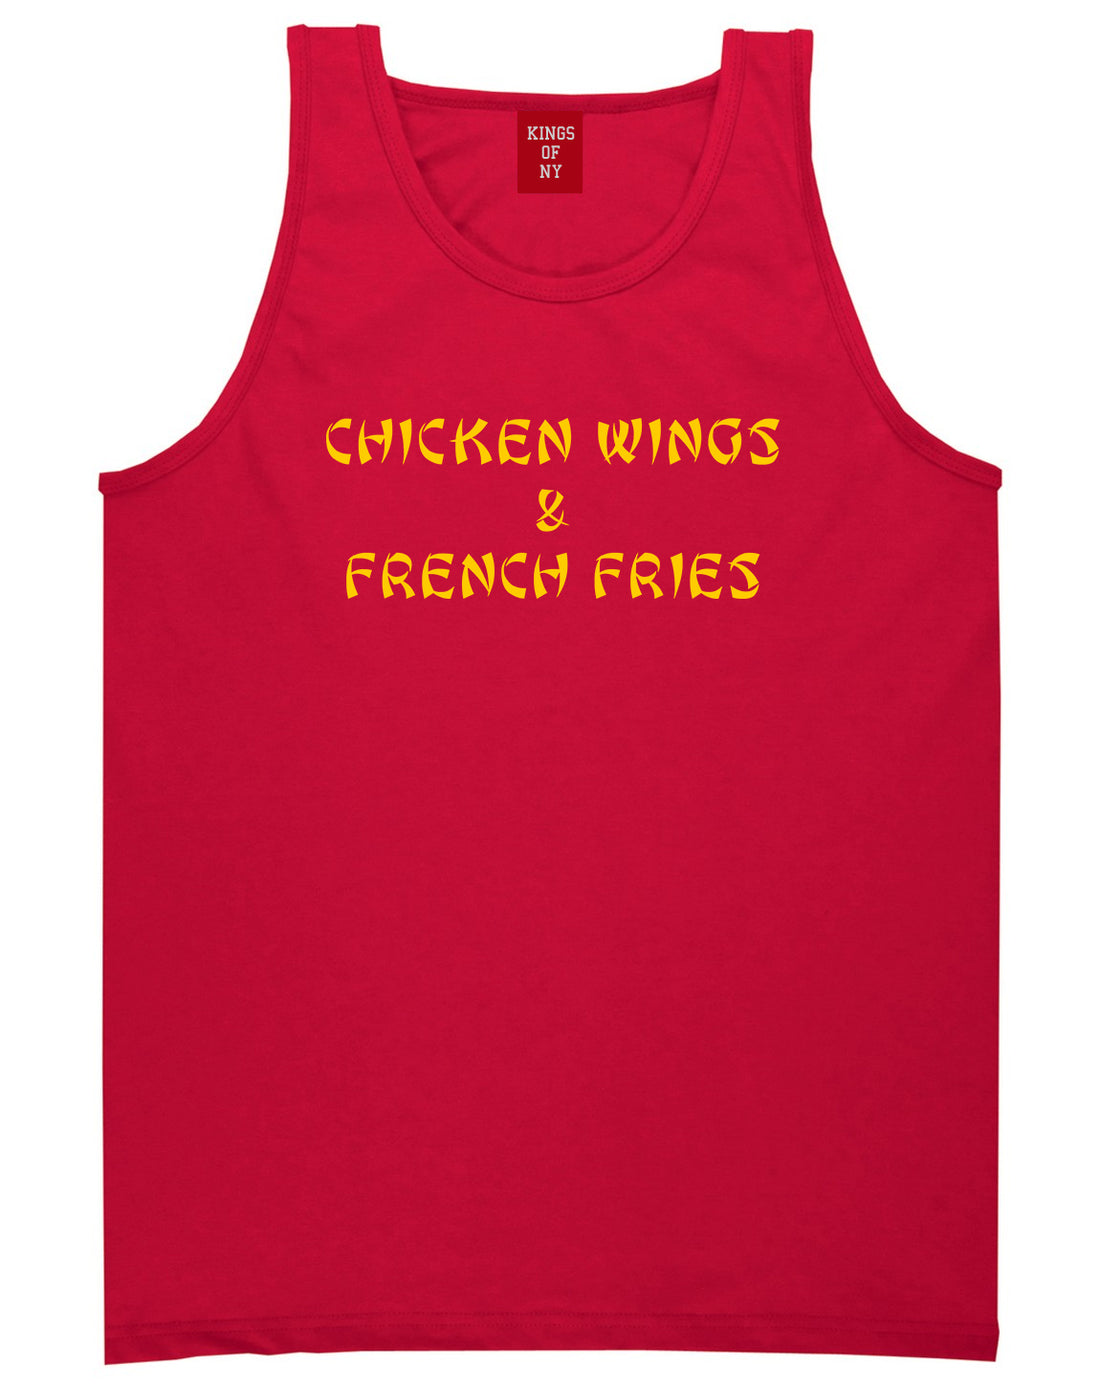 Chicken Wings And French Fries Tank Top Shirt in Red